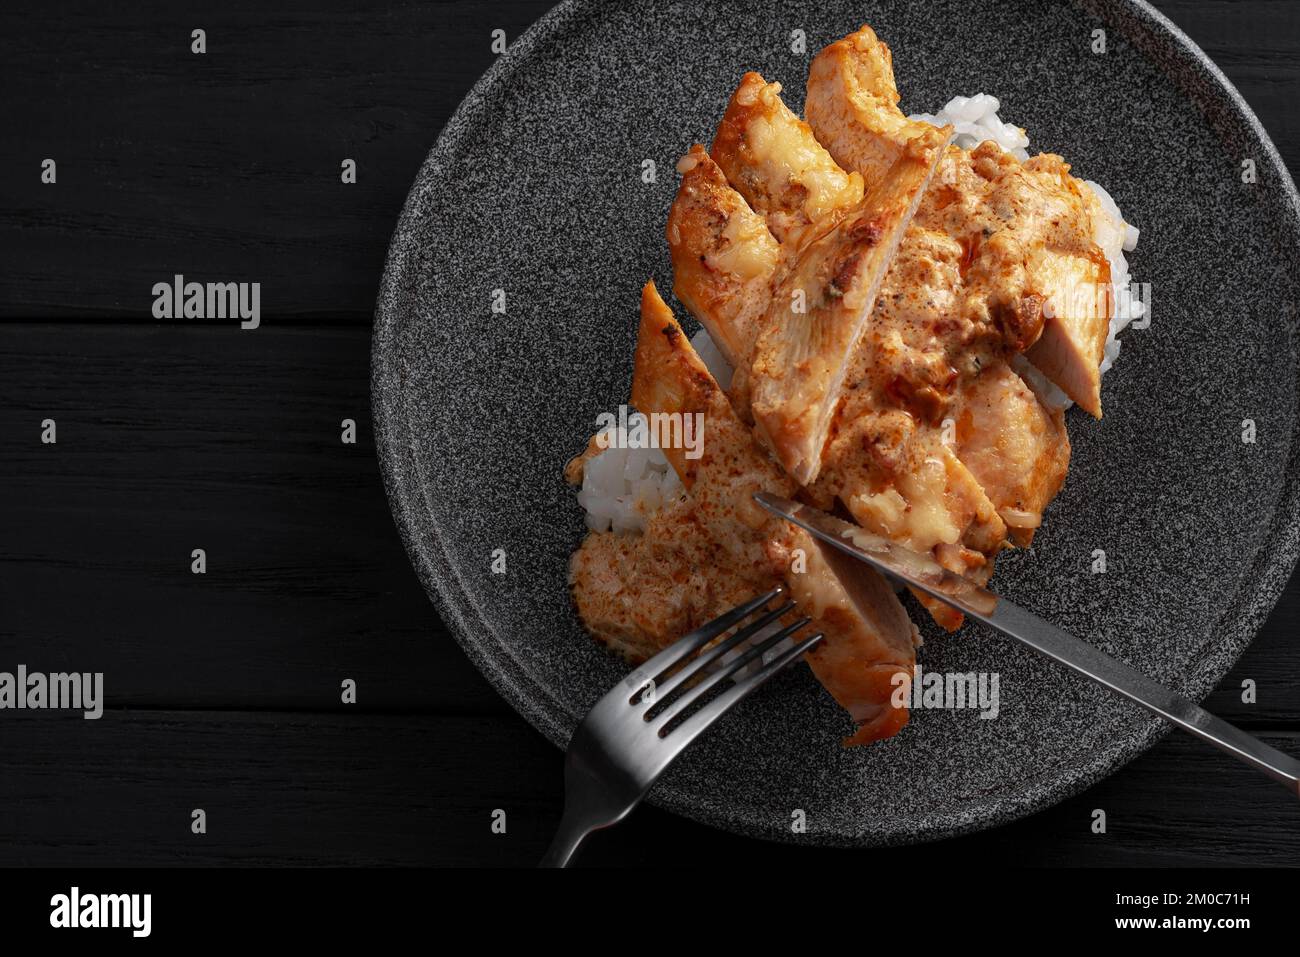 A man is eating an Indian dish. Hands holding knife and fork. Indian chicken with butter and basmati rice in a plate. .Black background. Place for Stock Photo